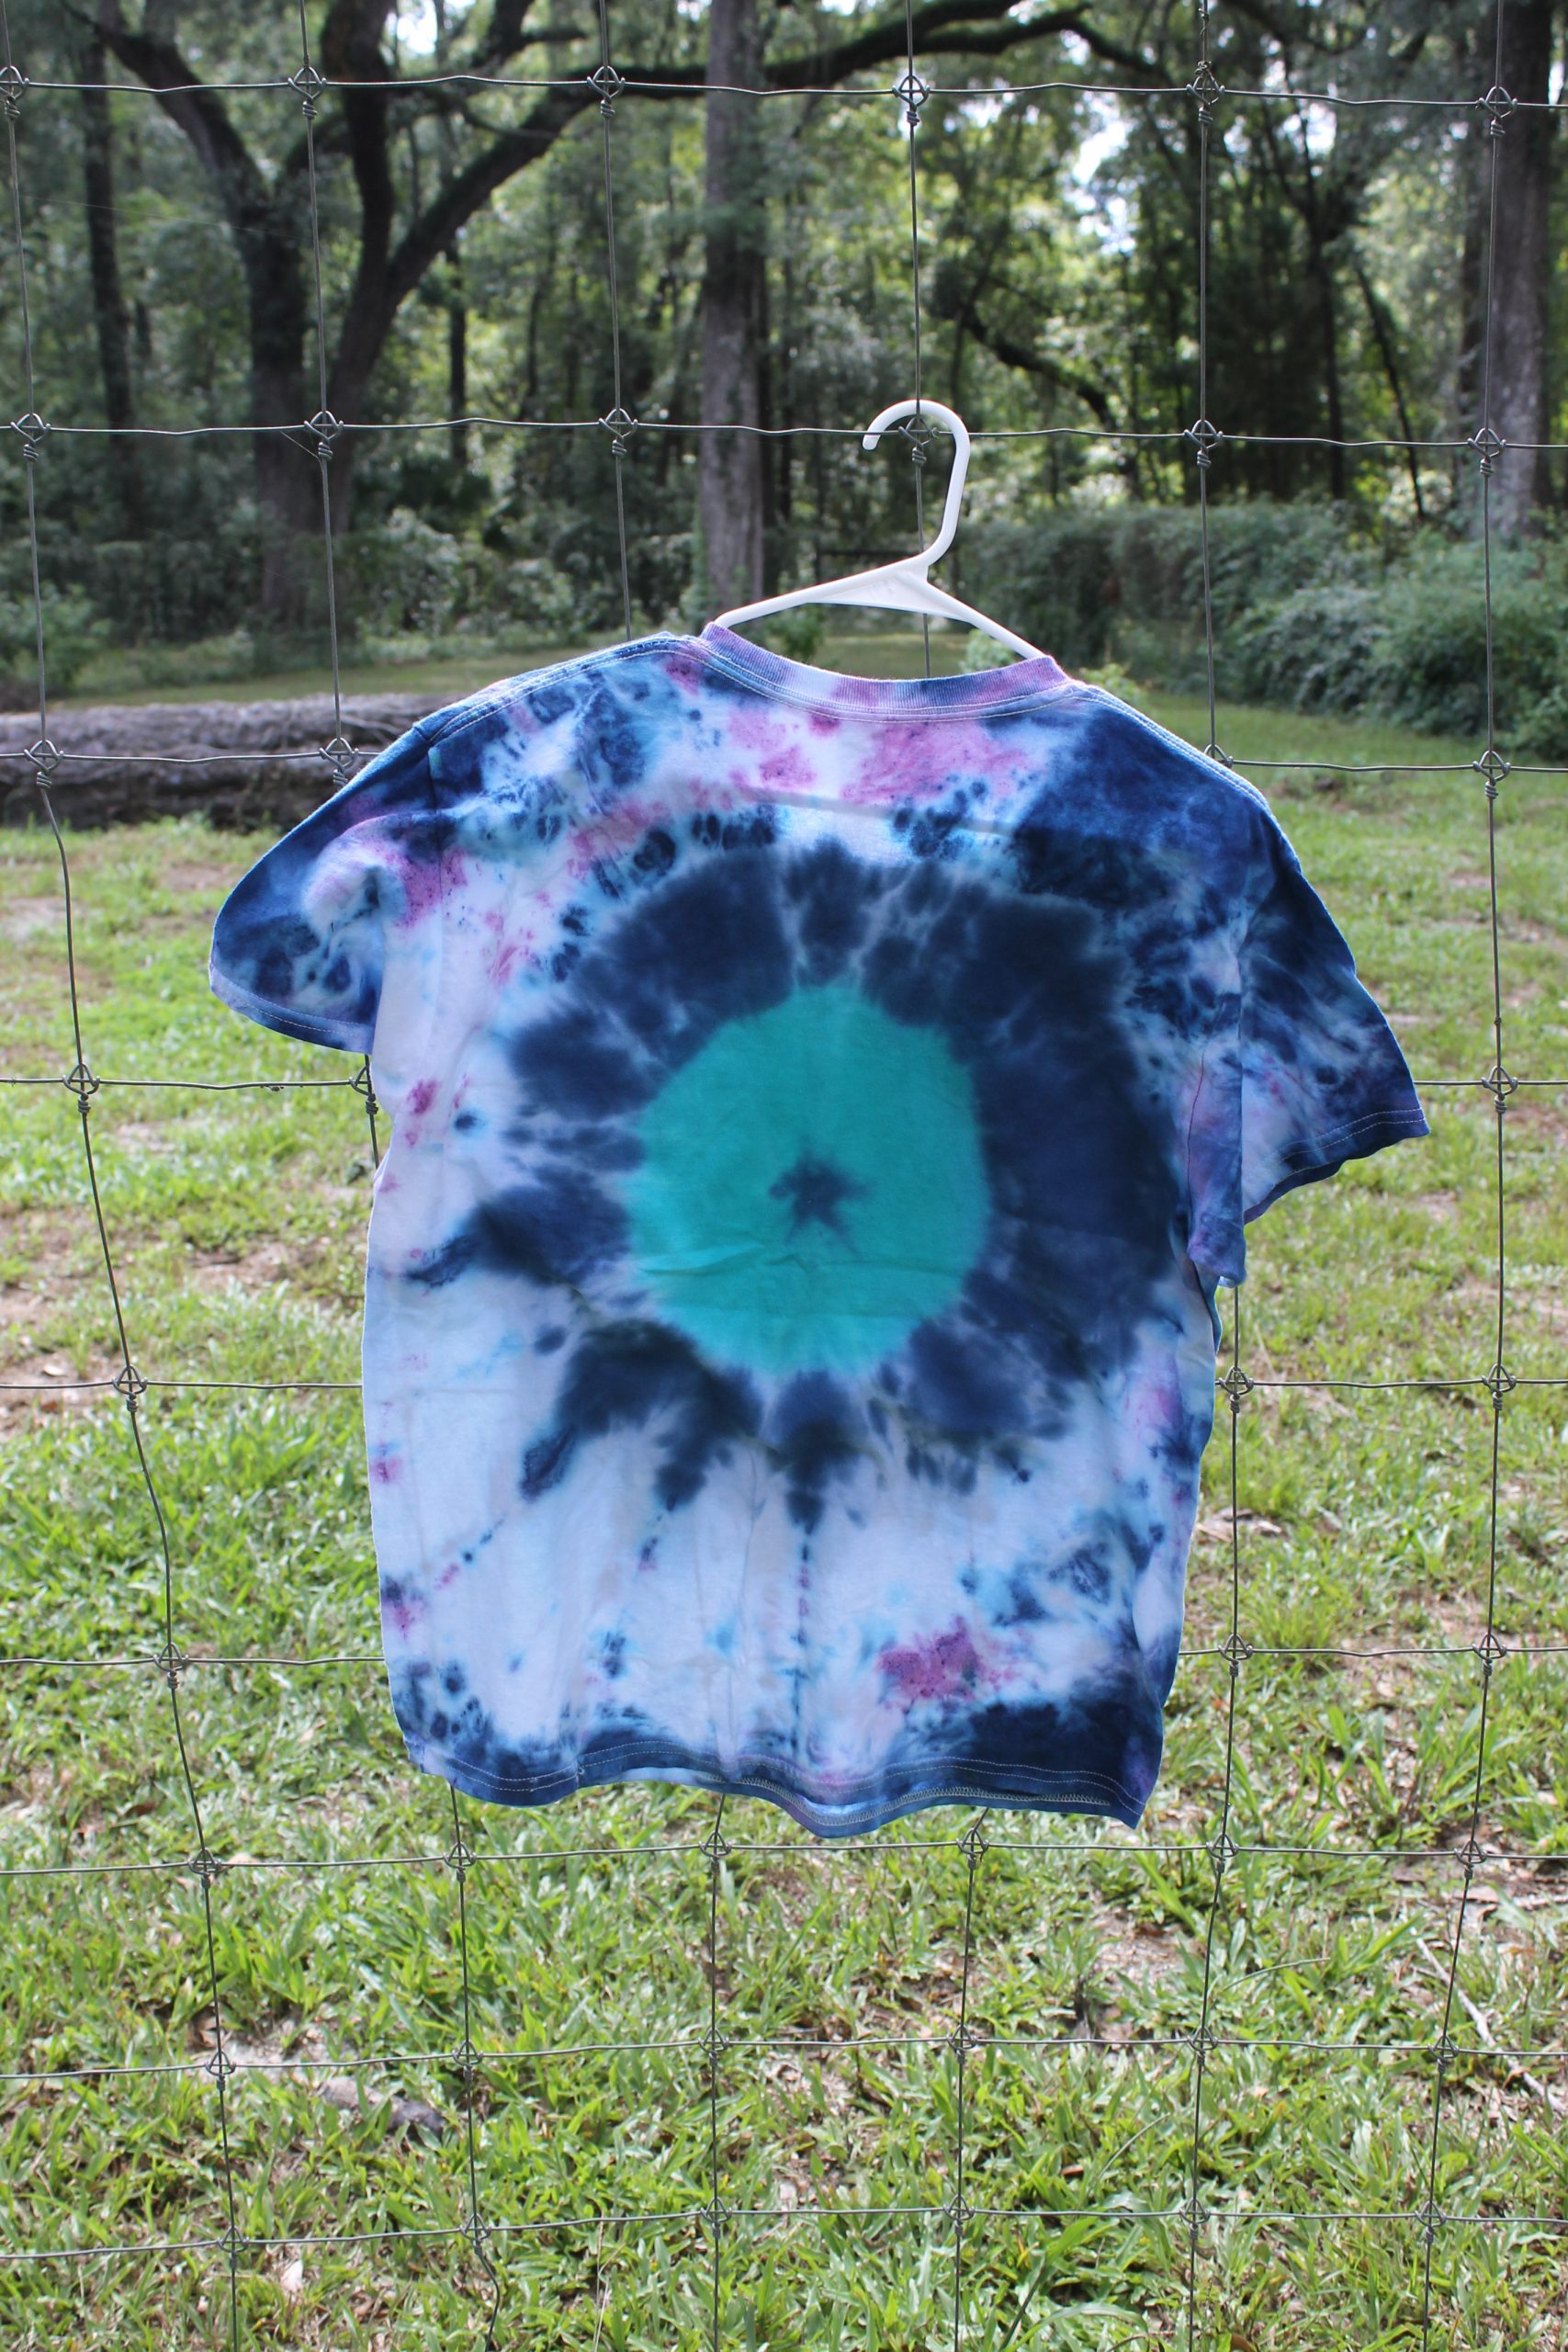 Get Your Groove on With a Tye-Dye T-Shirt